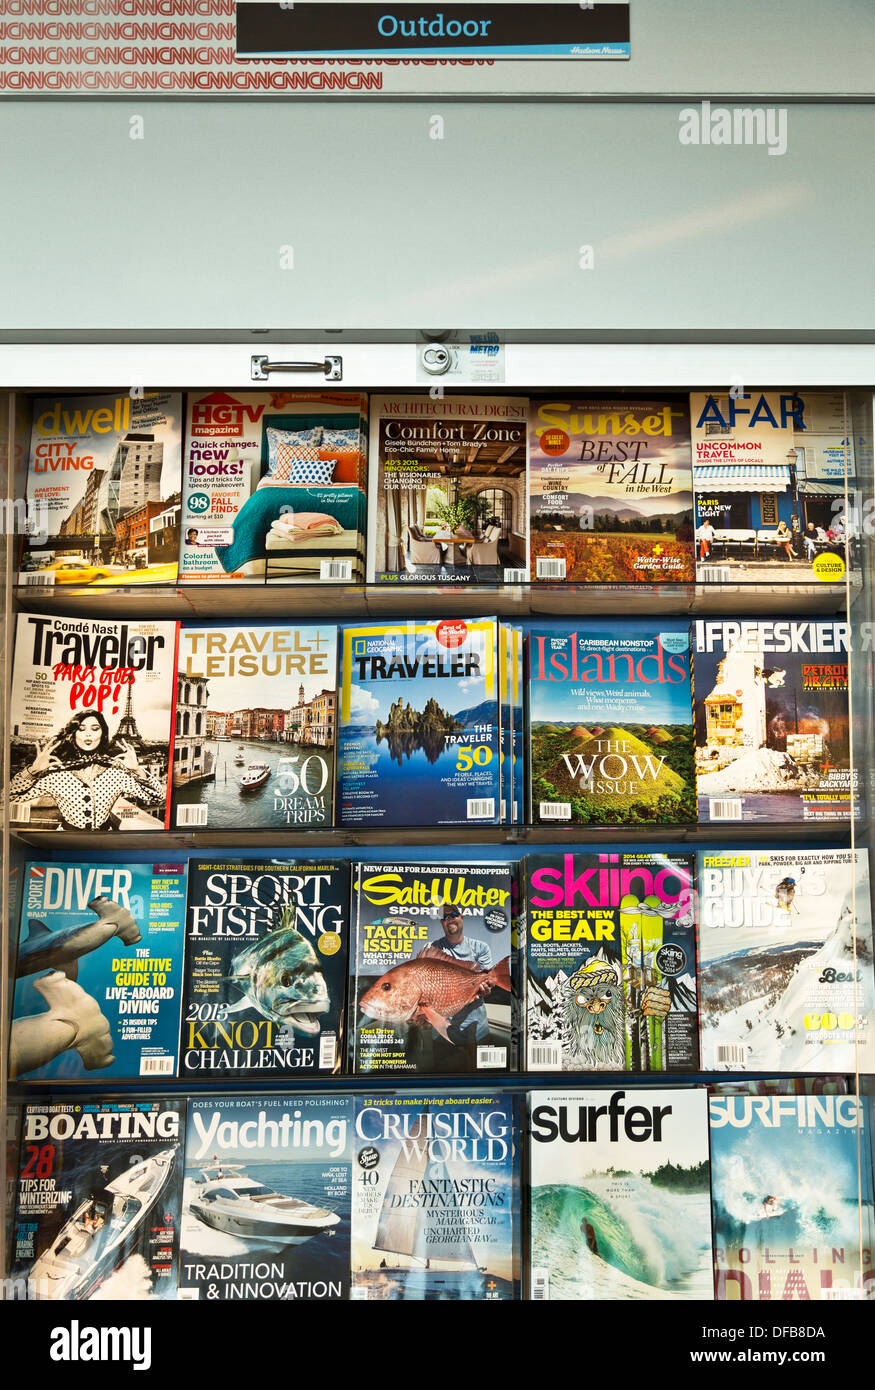 Outdoor magazines for sale on shelf in bookstore Stock Photo